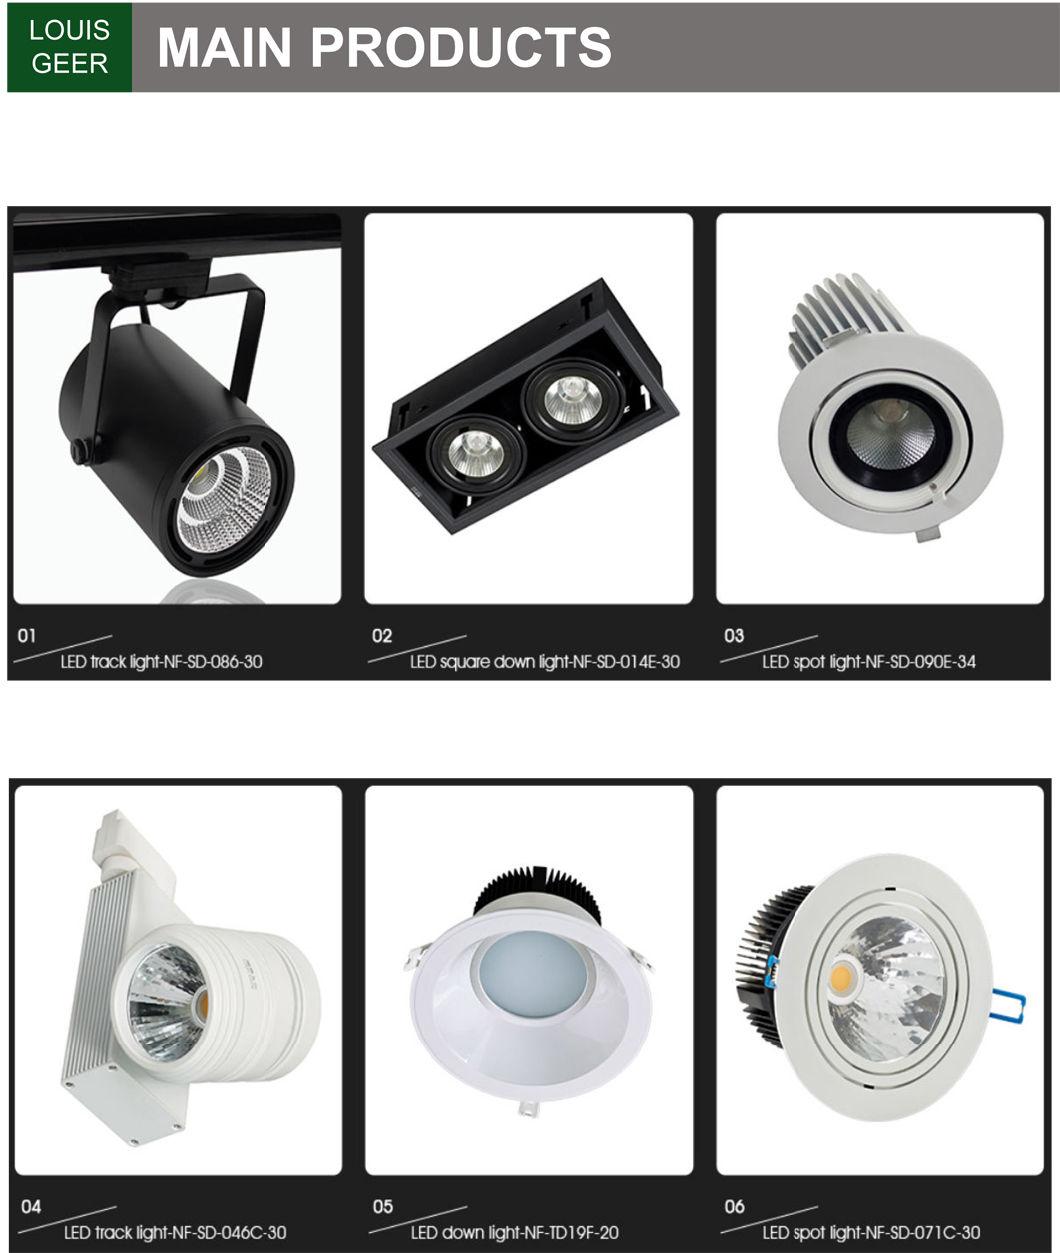 2021 New Economical 15W Adjustable Beam Anti-Glare Lights for Room Square Recessed Ceiling LED Downlight Spotlight